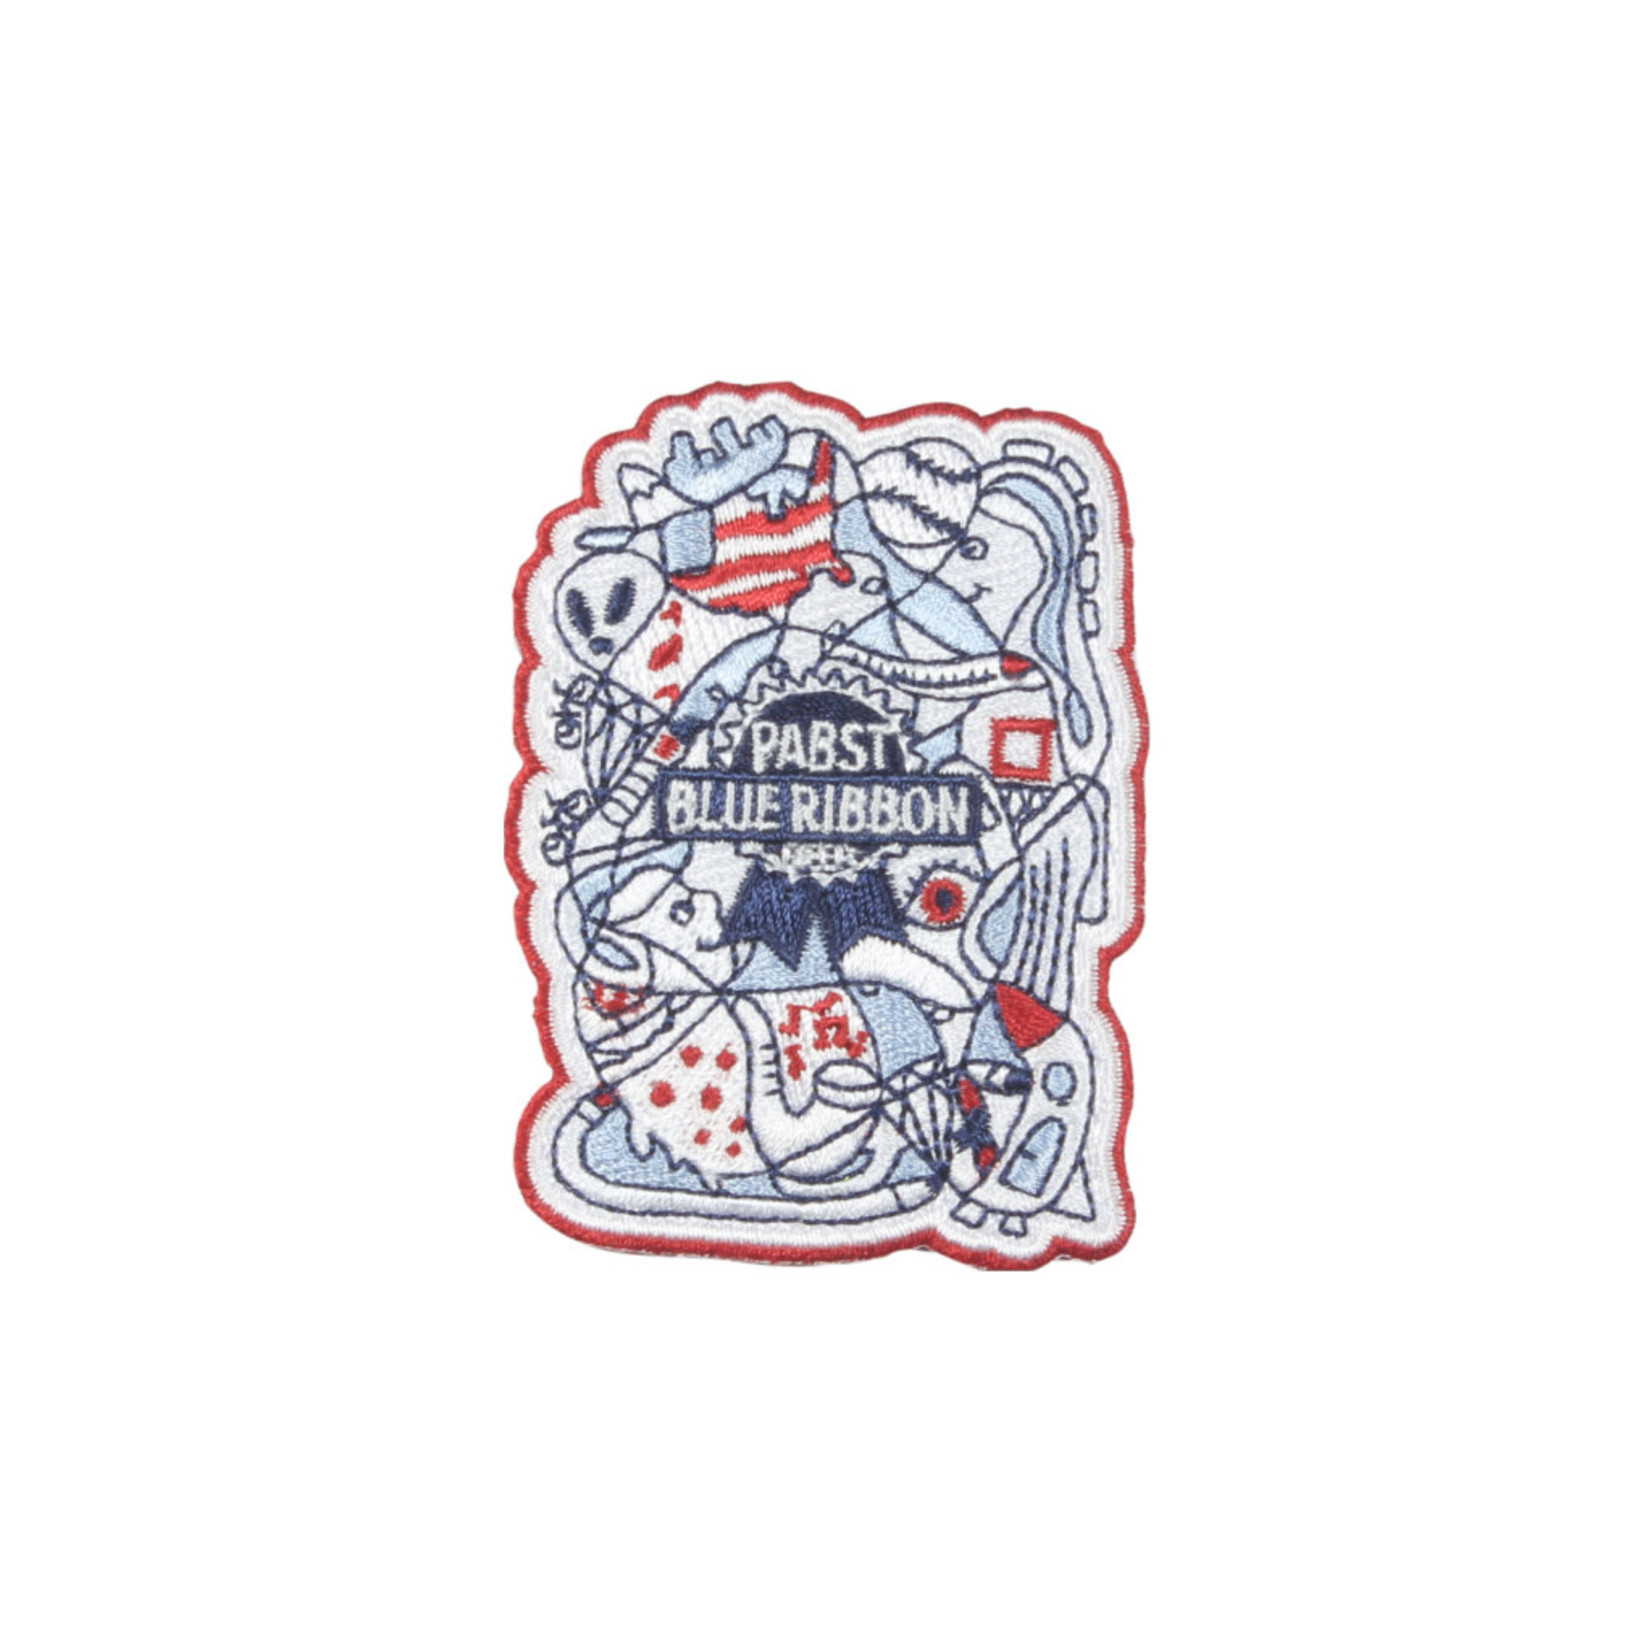 Pabst Pabst Patch - Kelly Art